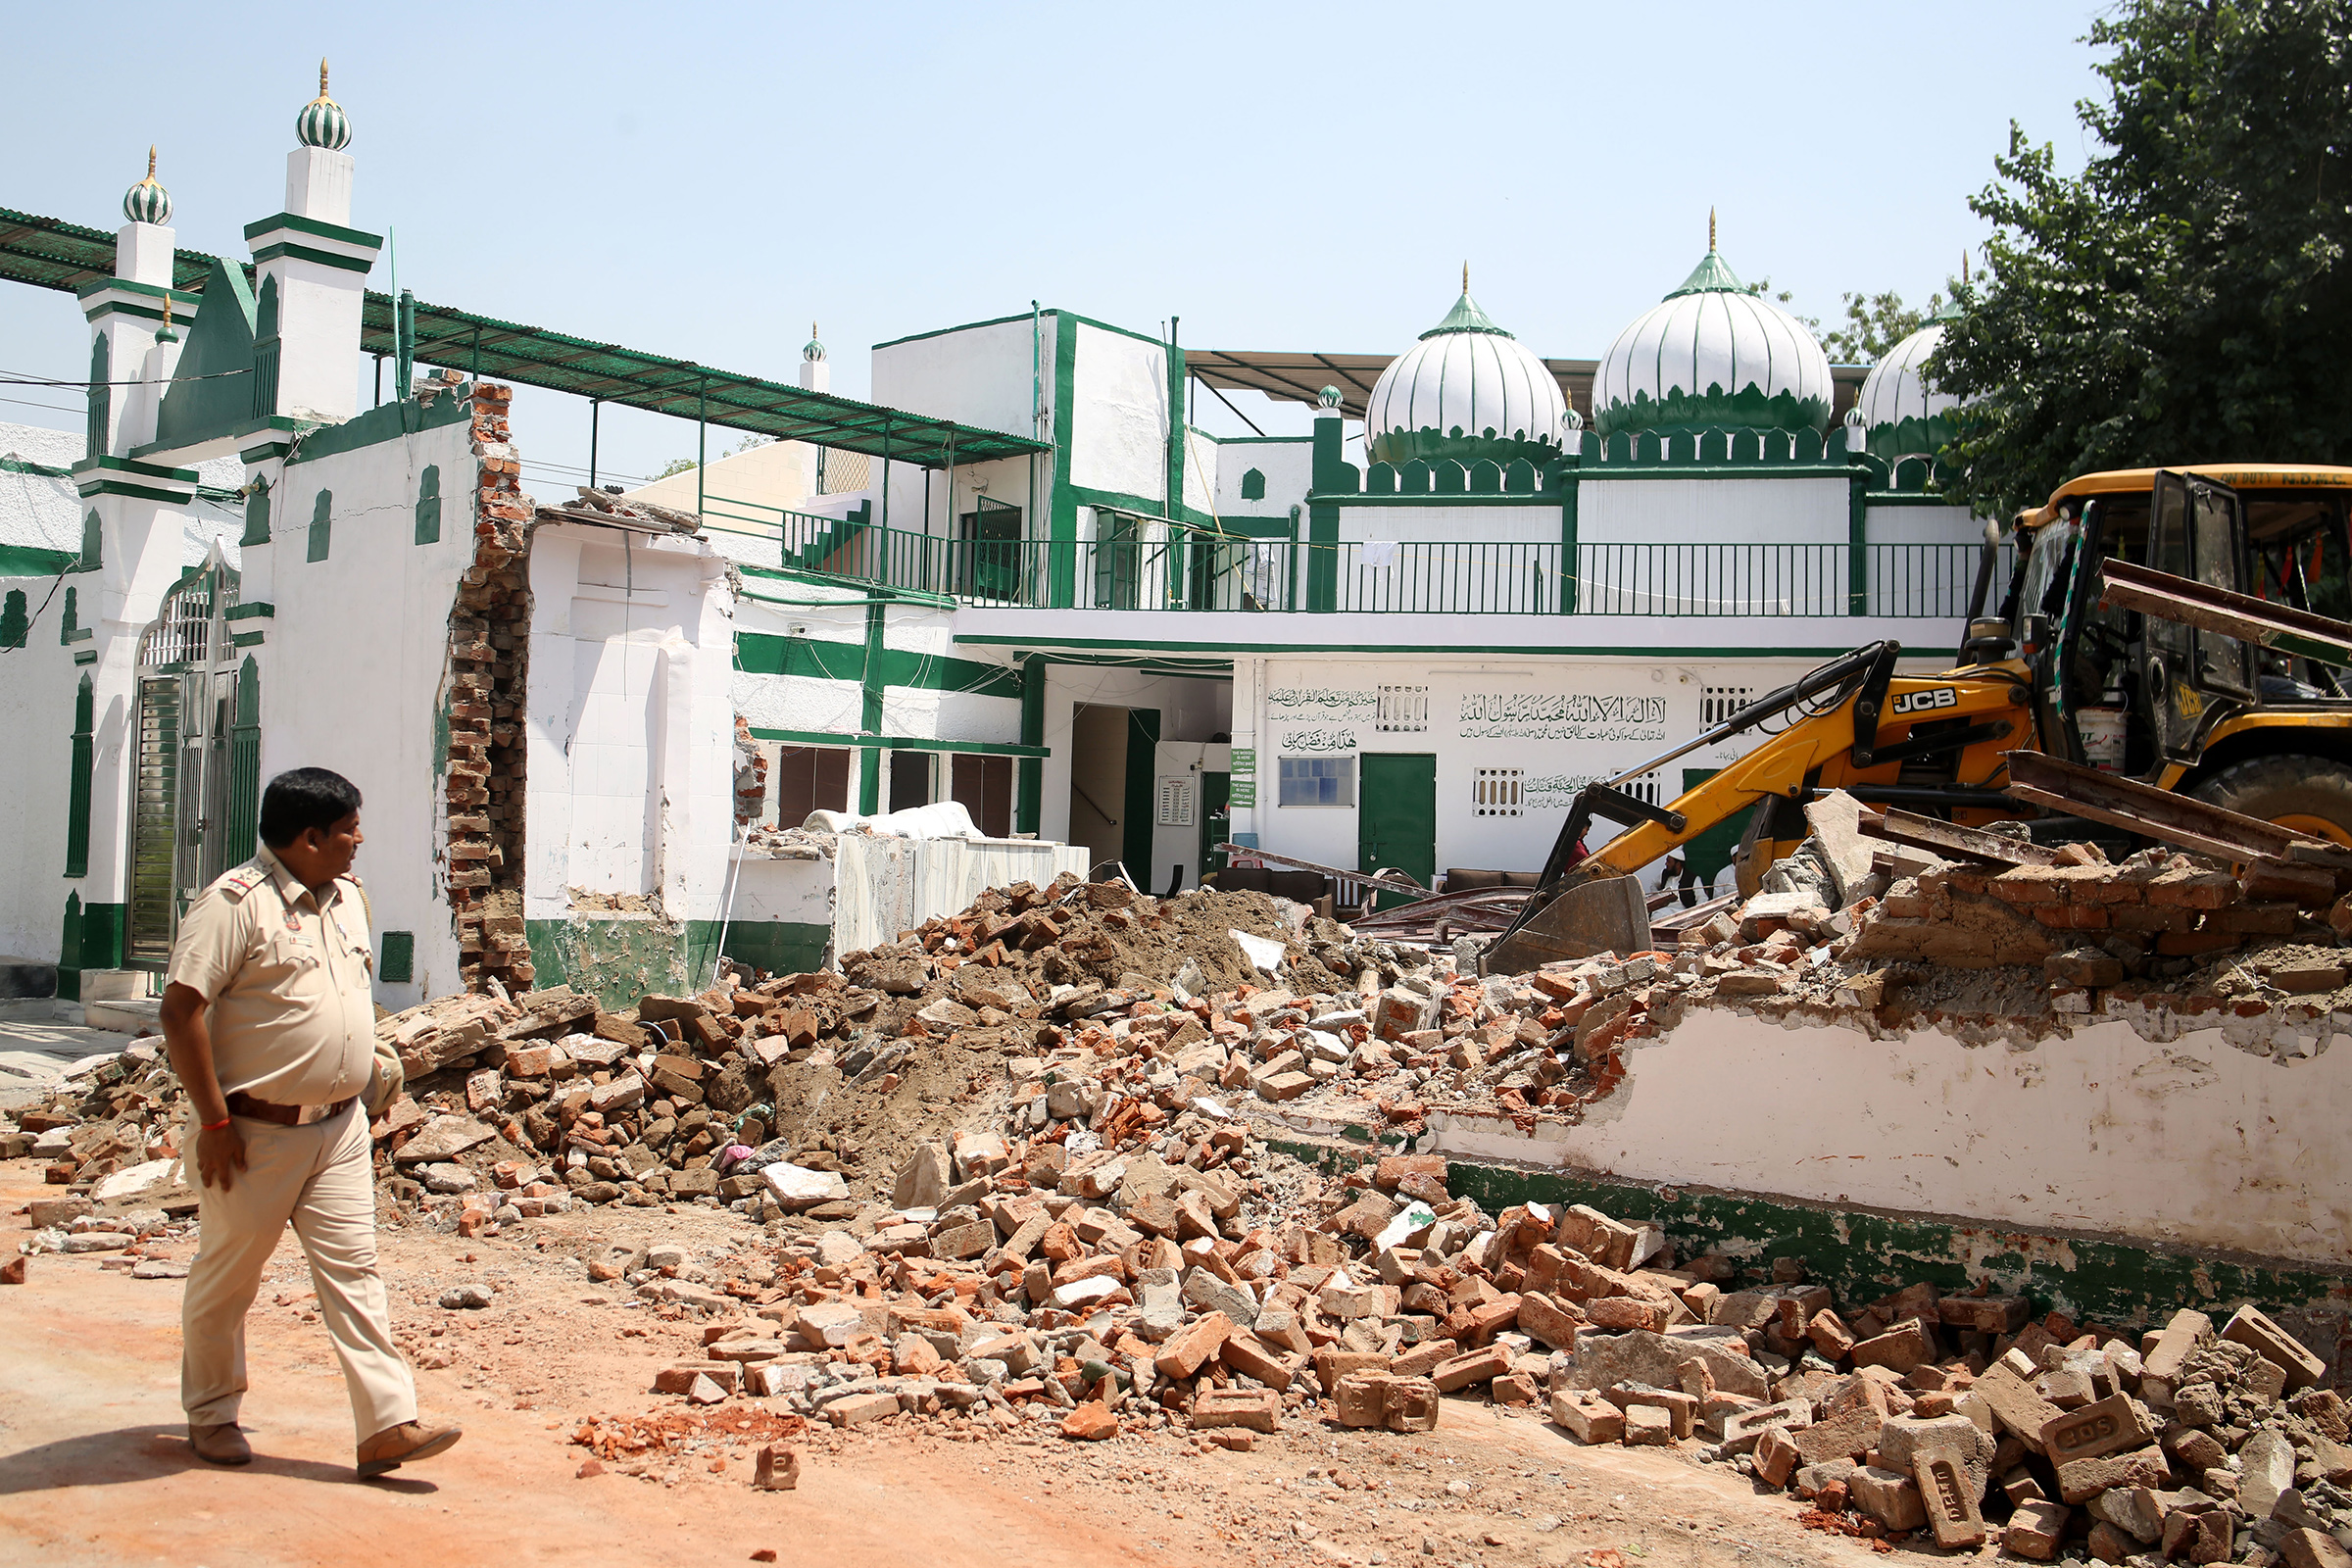 A bulldozer is demolishing an alleged illegal structure of a Bengali market mosque during an anti-encroachment drive by the New Delhi Municipal Corporation (NDMC) on April 11 in New Delhi.